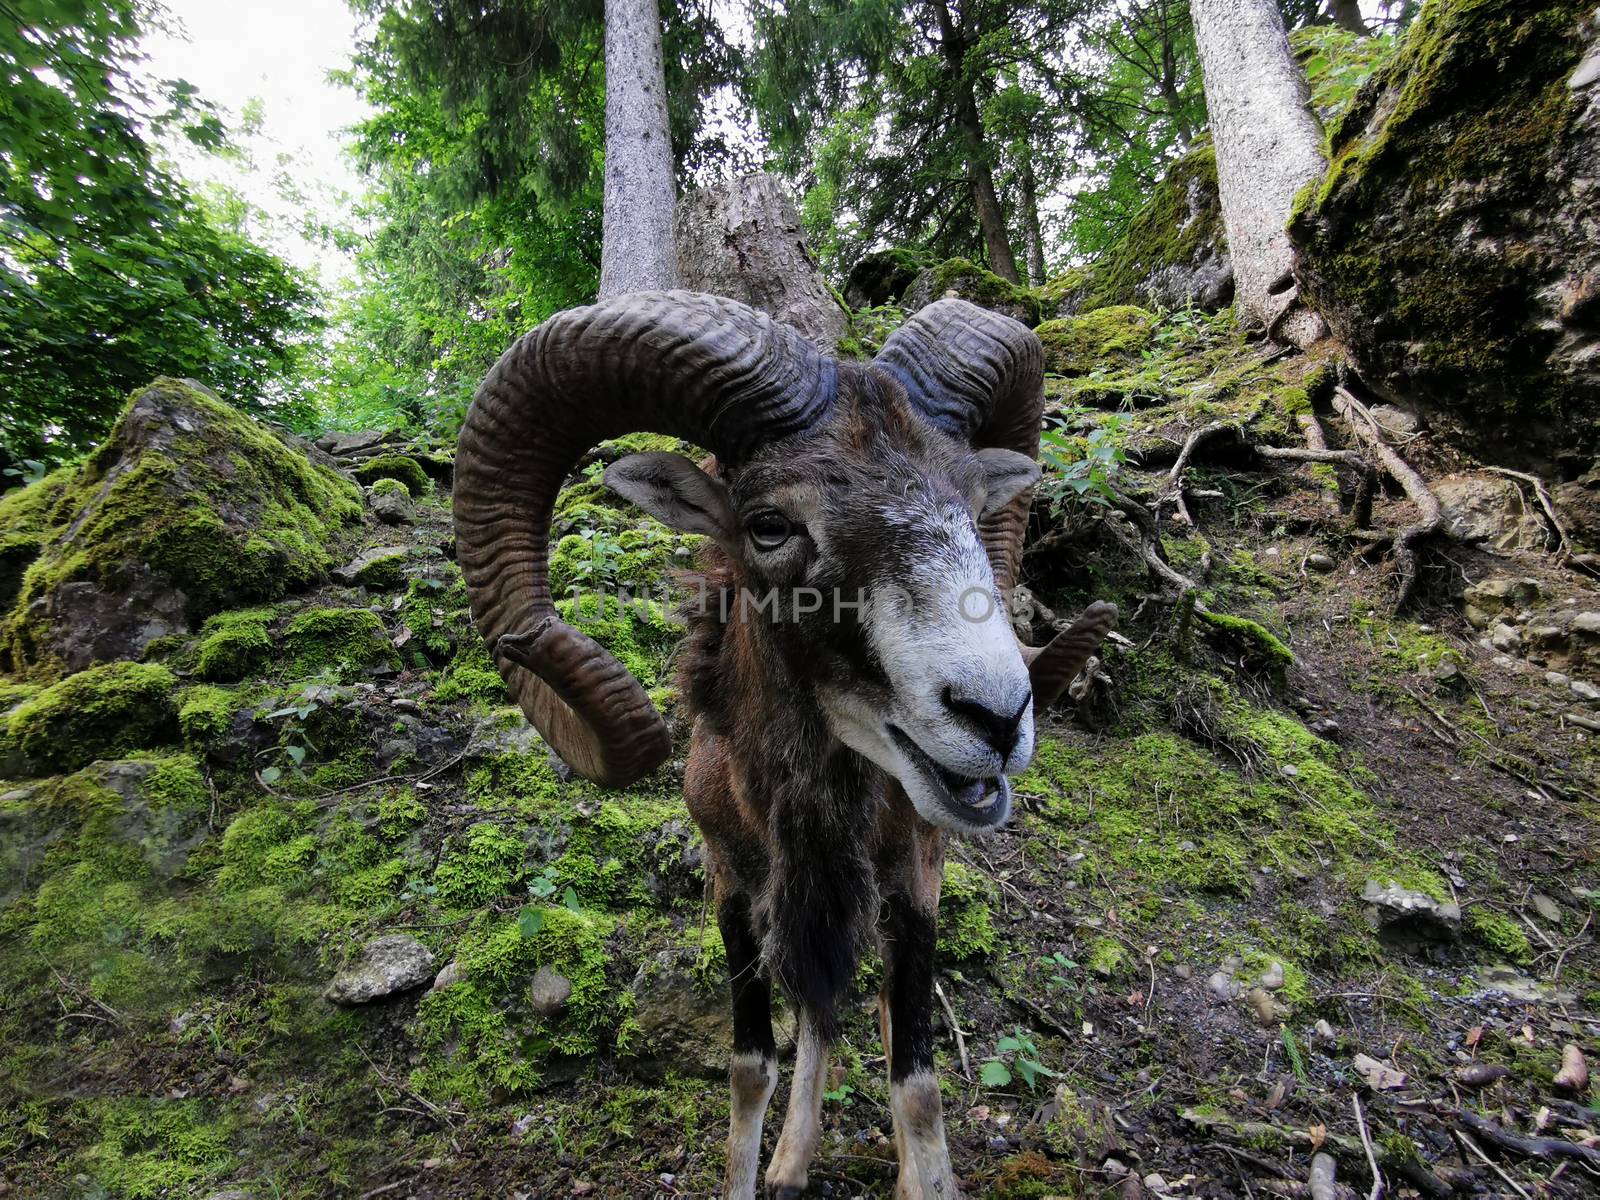 Capricorn looking into camera with big nose in foreground, in par by PeterHofstetter